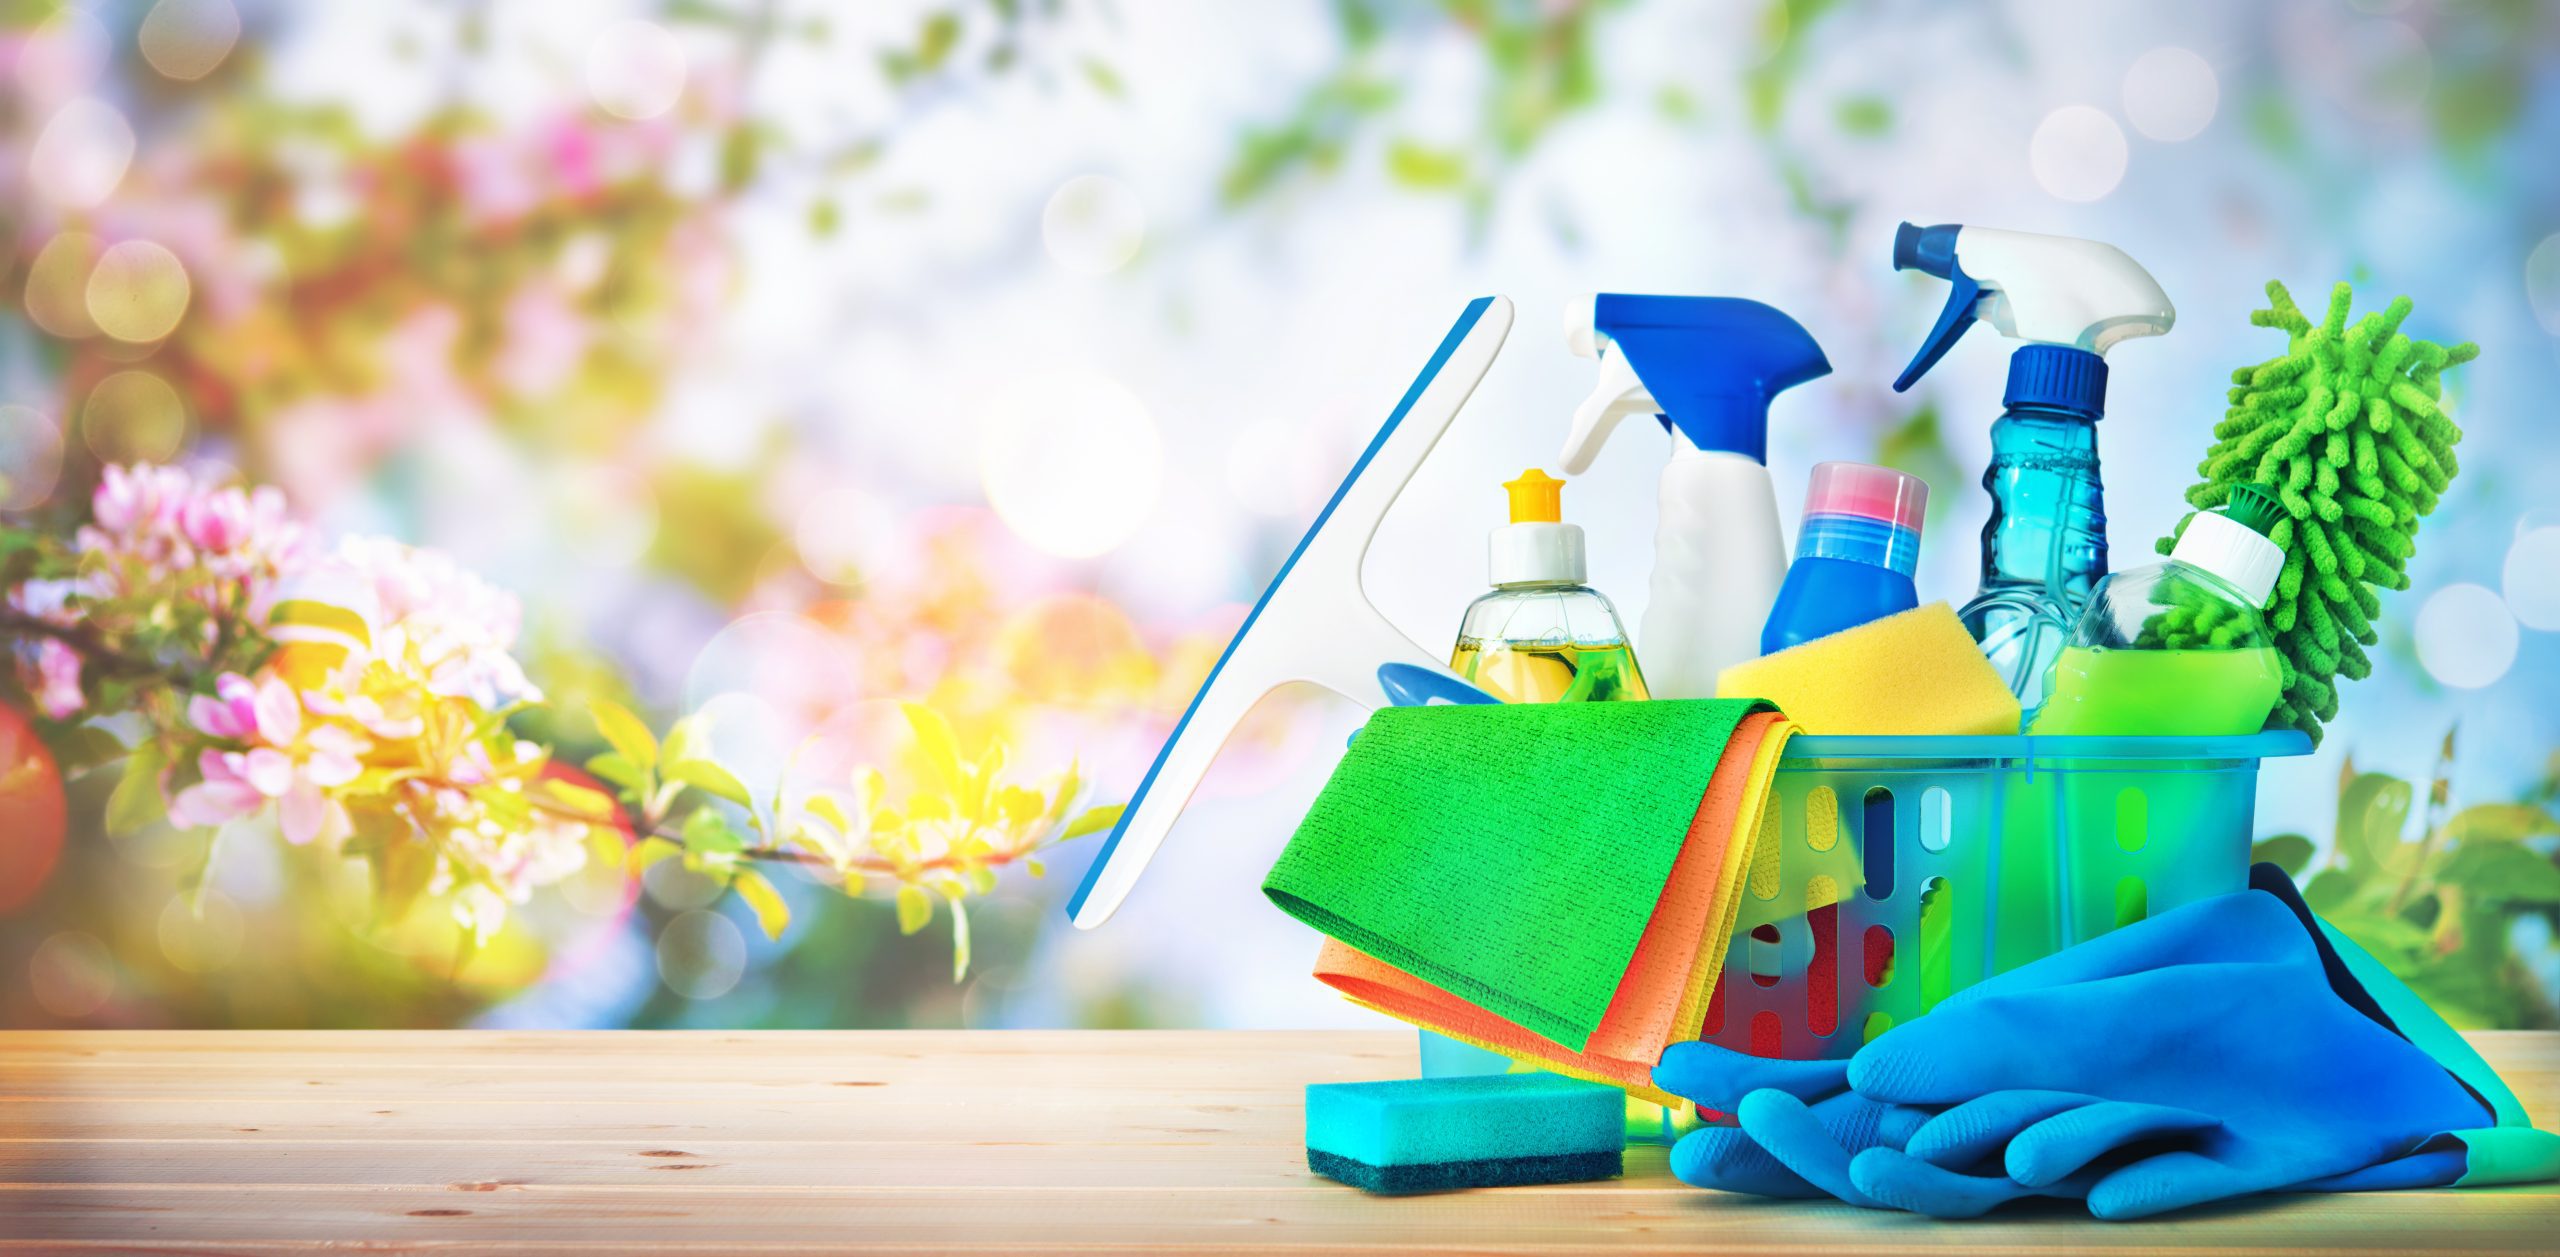 How can schools maintain cleanliness throughout the school year?